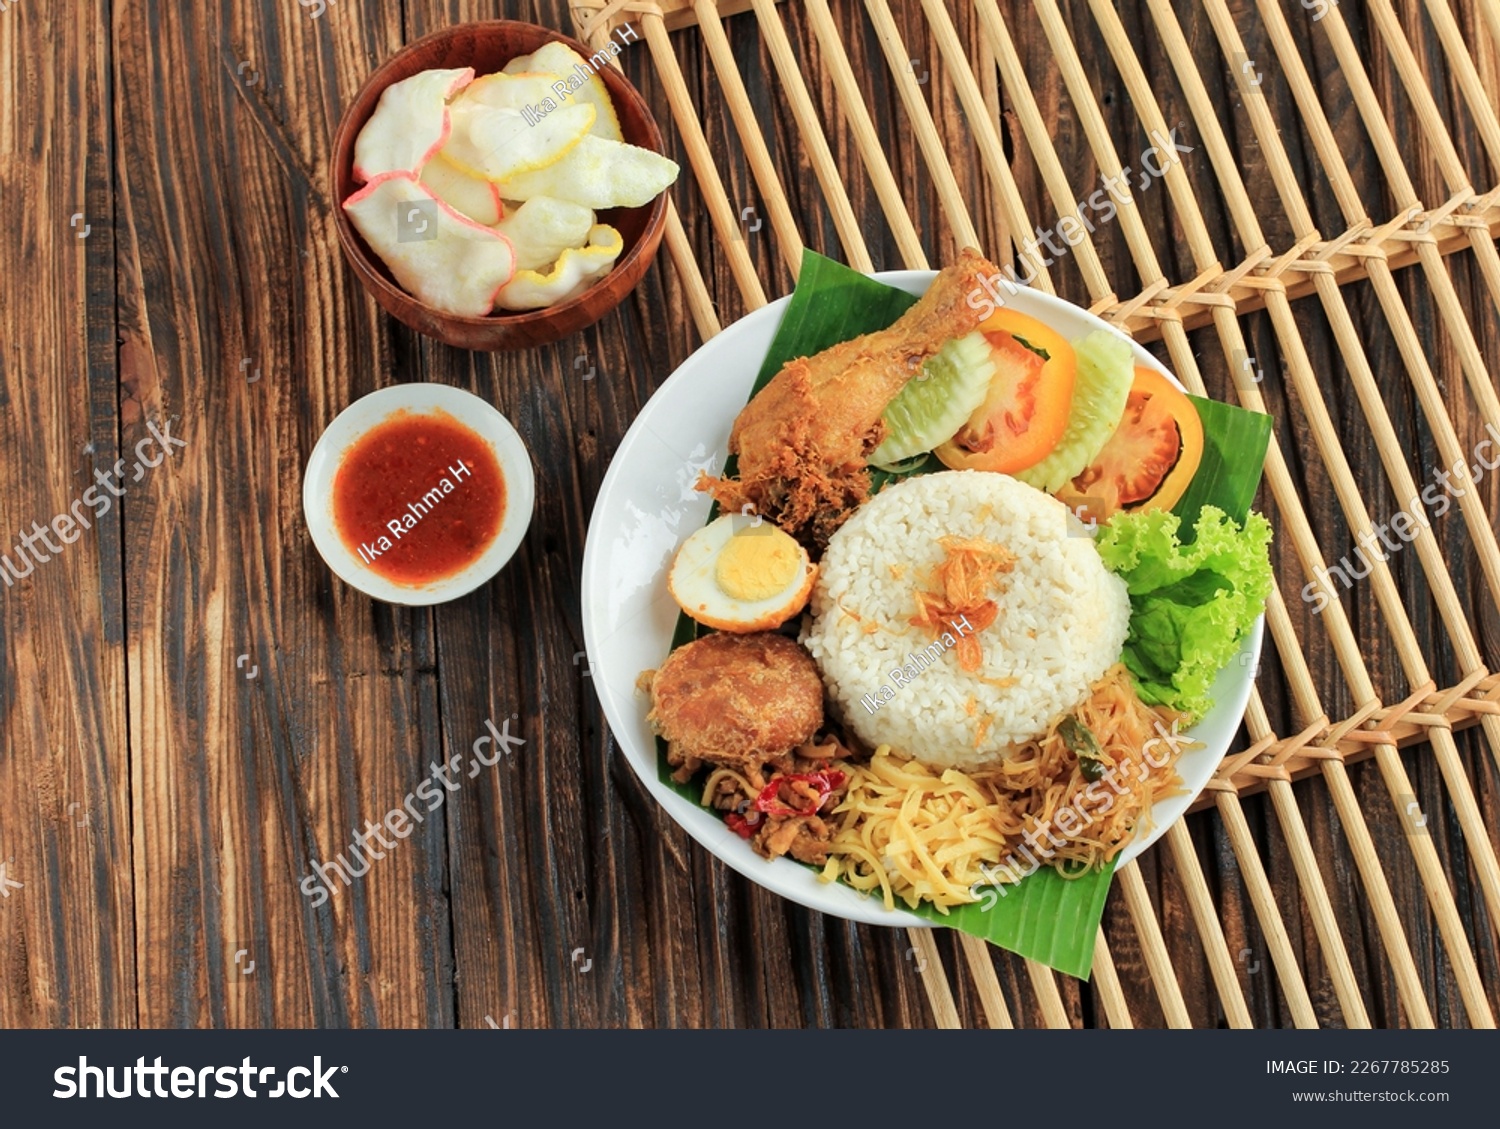 Top Vie Nasi Uduk, Typical Indonesian Food for Breakfast. Steamed Rice Cooked with Coconut Milk, Served with Fried Chicken. Eggs, Tempeh Oreg, and Bihun #2267785285